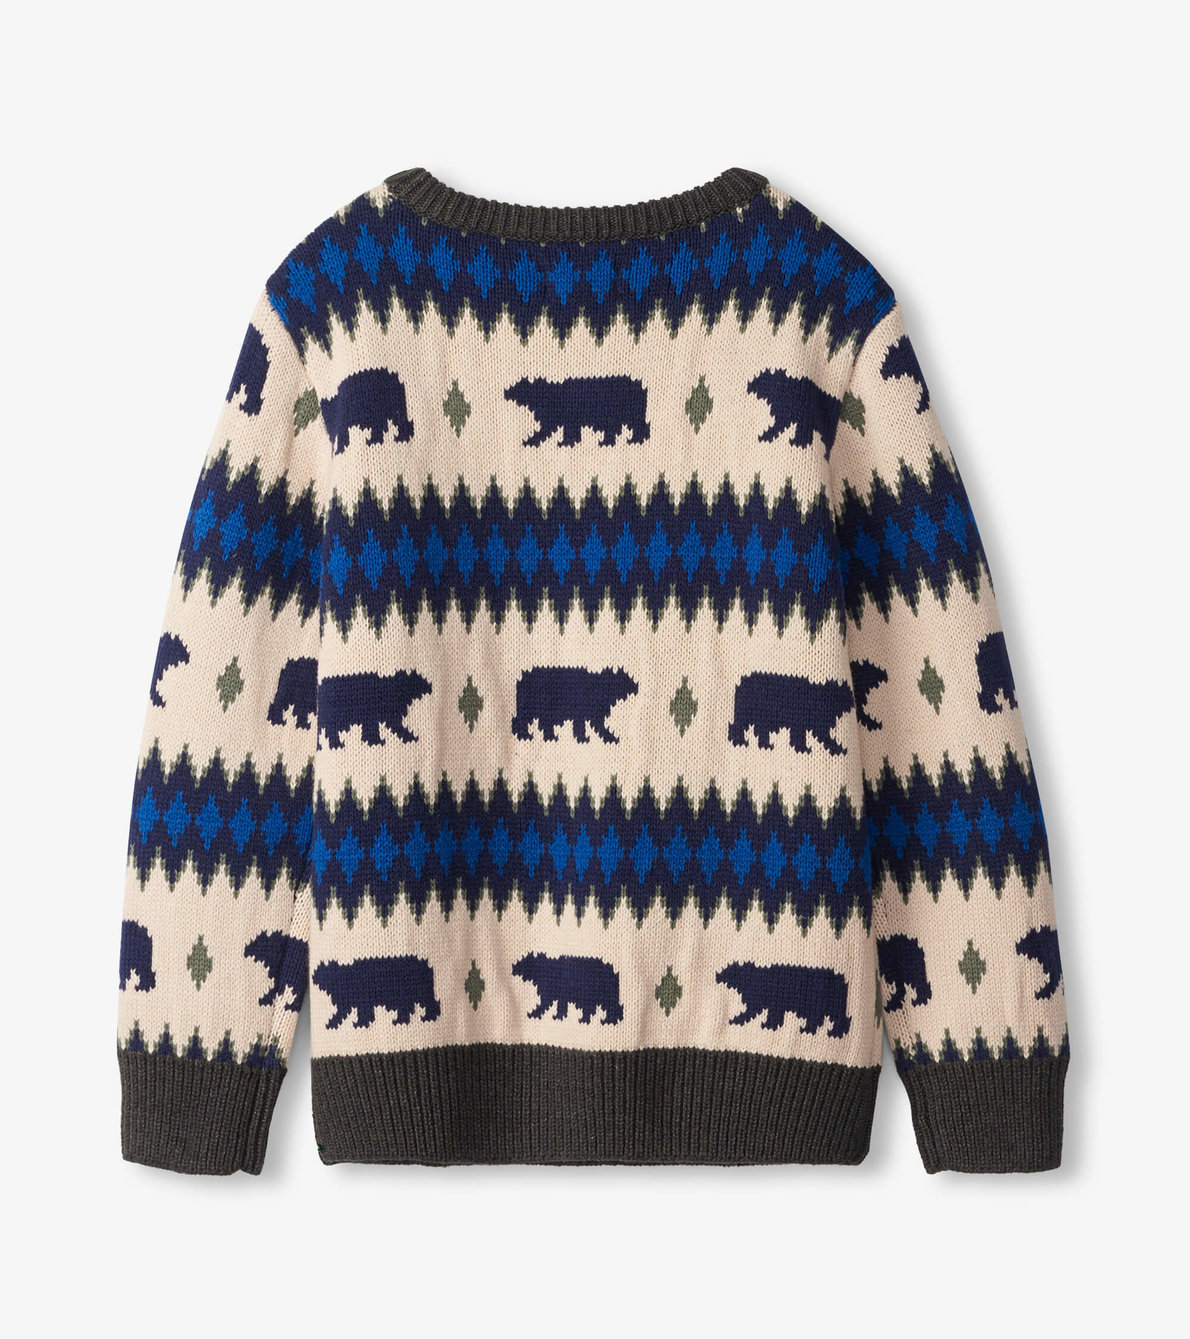 View larger image of Bear Fair Isle V-Neck Sweater